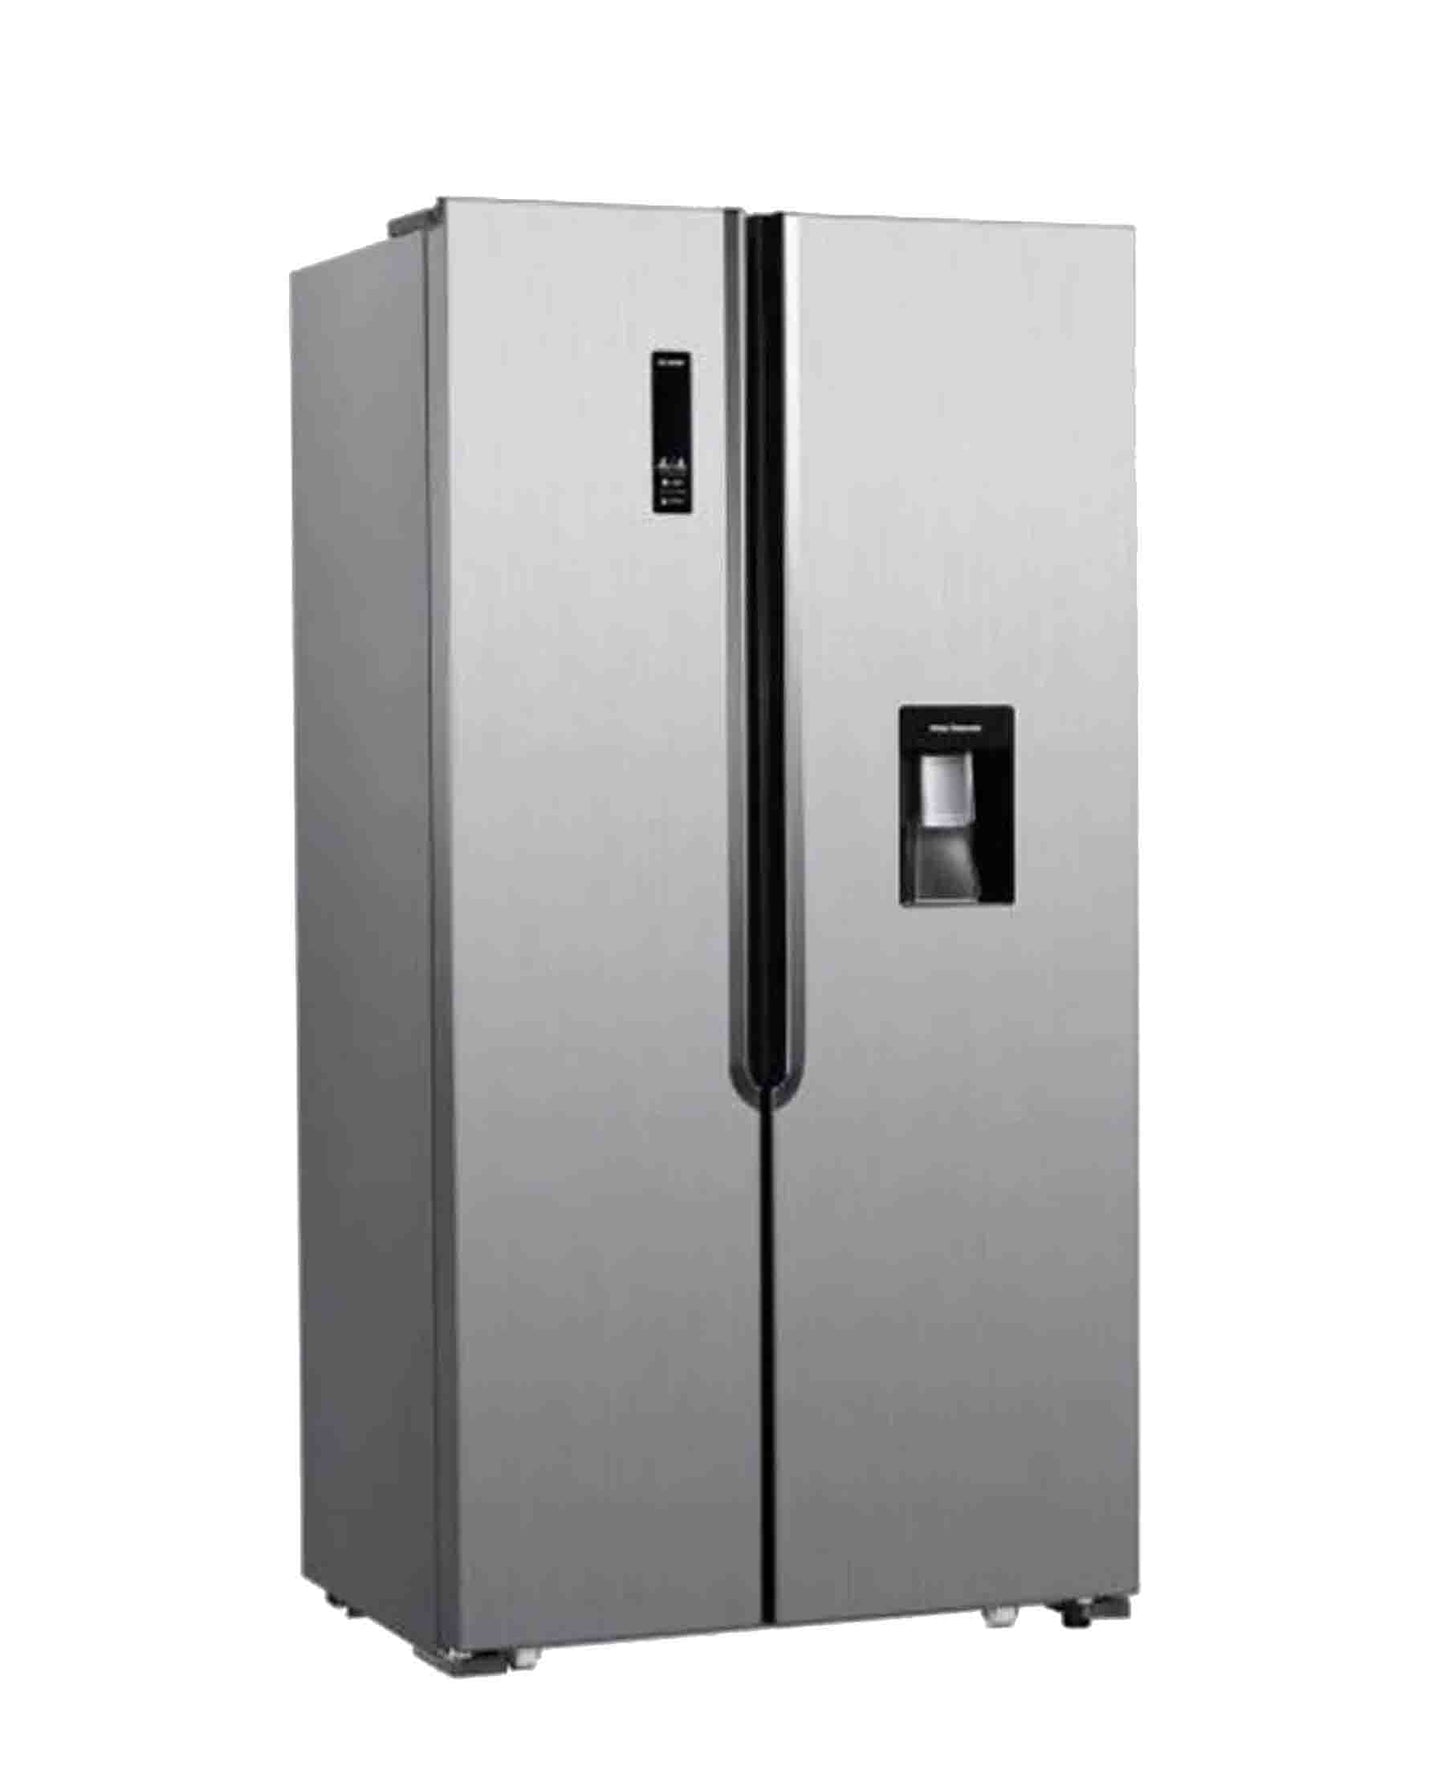 AEG 518L SIDE BY SIDE FRIDGE WITH FROST FREE FUNCTION AND WATER DISPENSER, STAINLESS STEEL